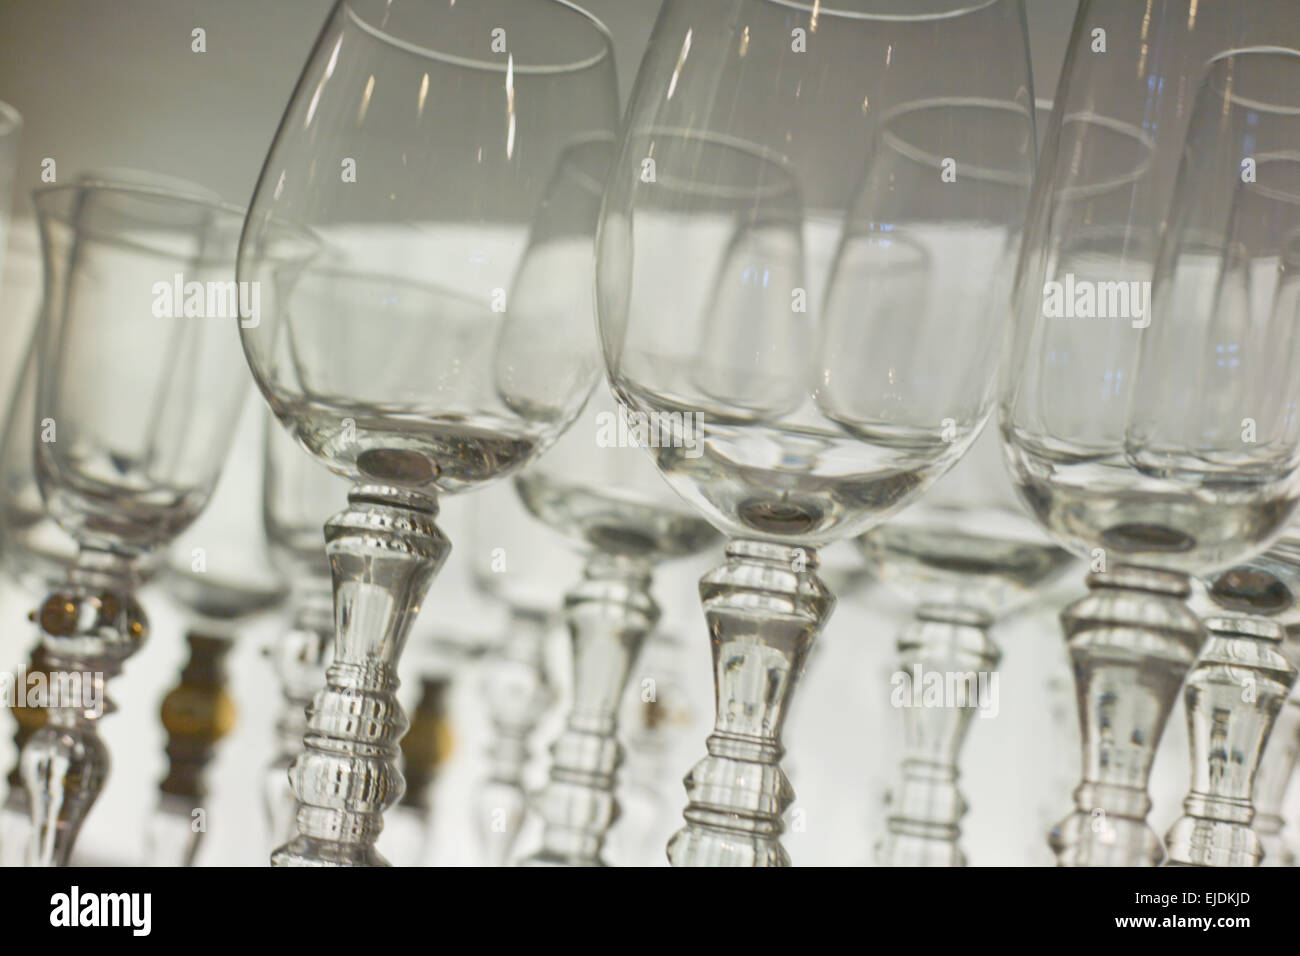 Some rows of empty wine glasses over white background. Closeup Stock Photo